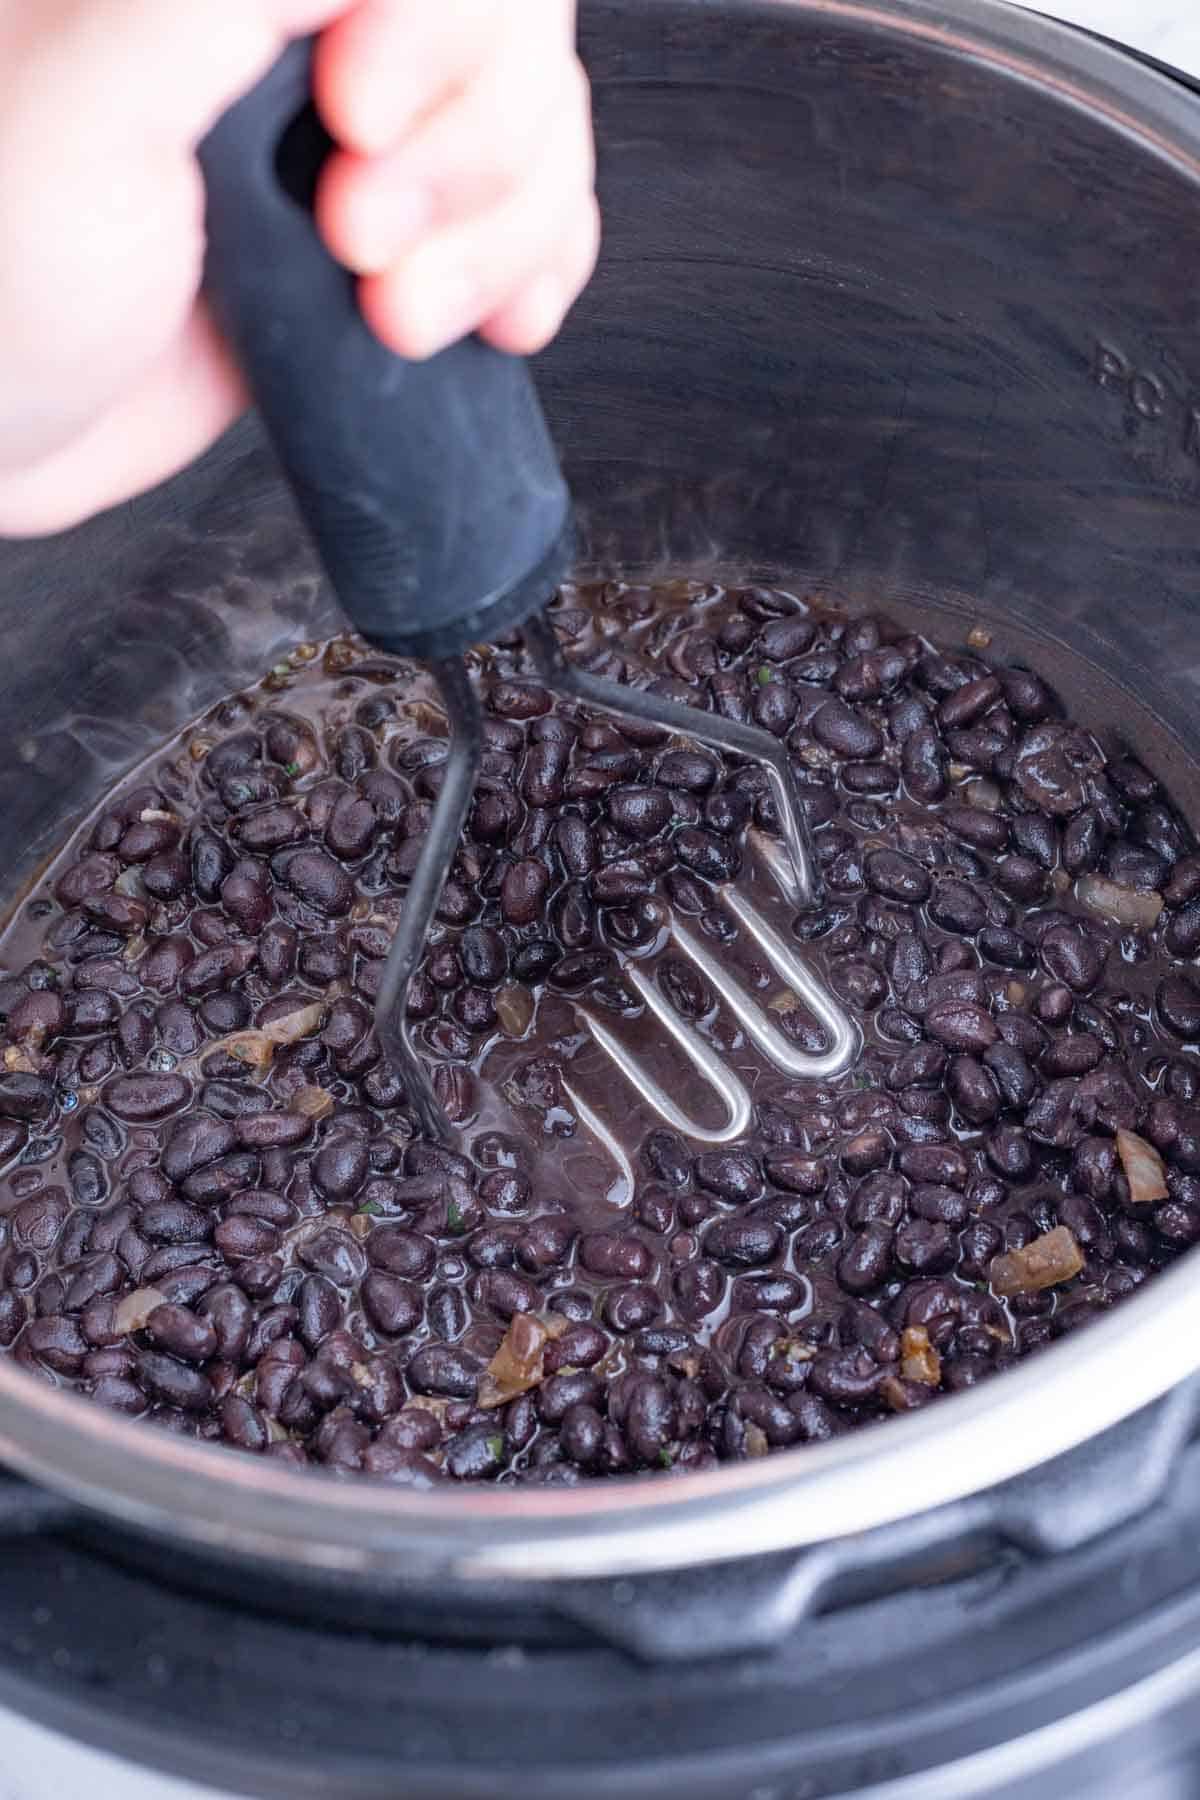 A potato masher is used to mash the black beans.